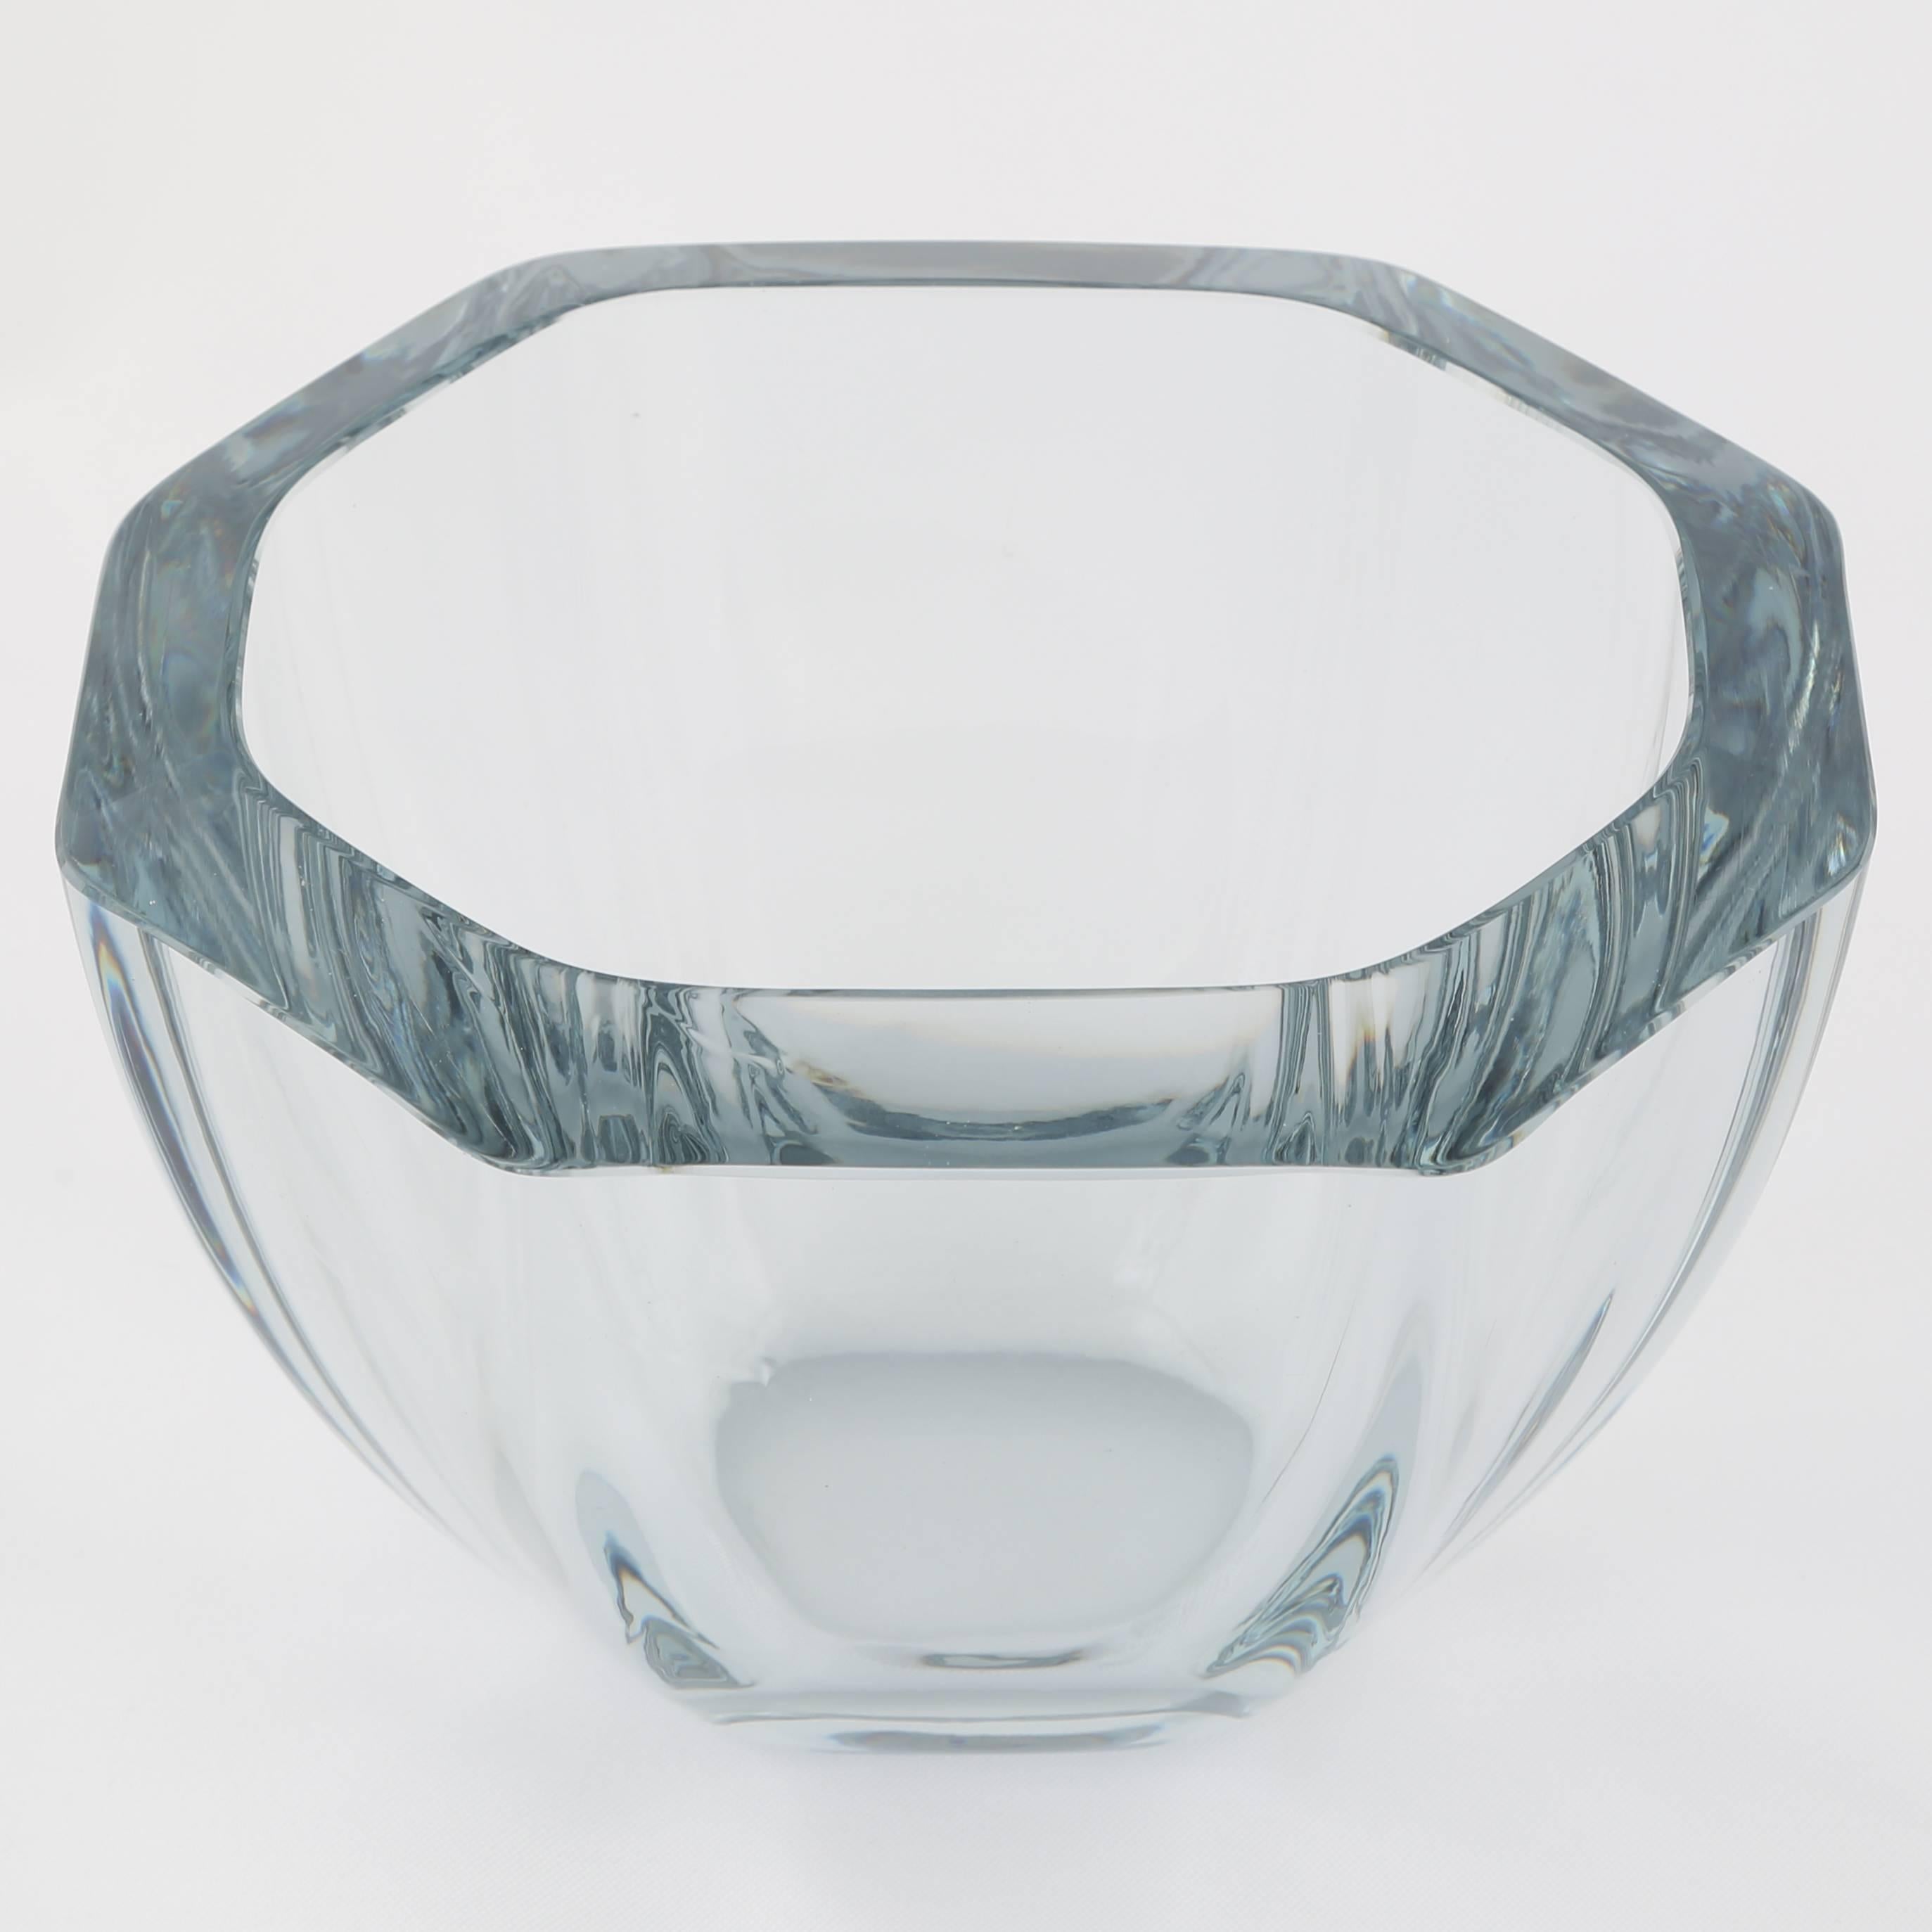 Heavy blown hexagonal bowl in Strombergshyttan's signature blue-silver glass, Sweden, circa 1950s. Unsigned.

Lindfors Glassworks was founded in 1876 and changed its name to Strombergshyttan in 1933, when Edward Stromberg, former head of Orrefors,